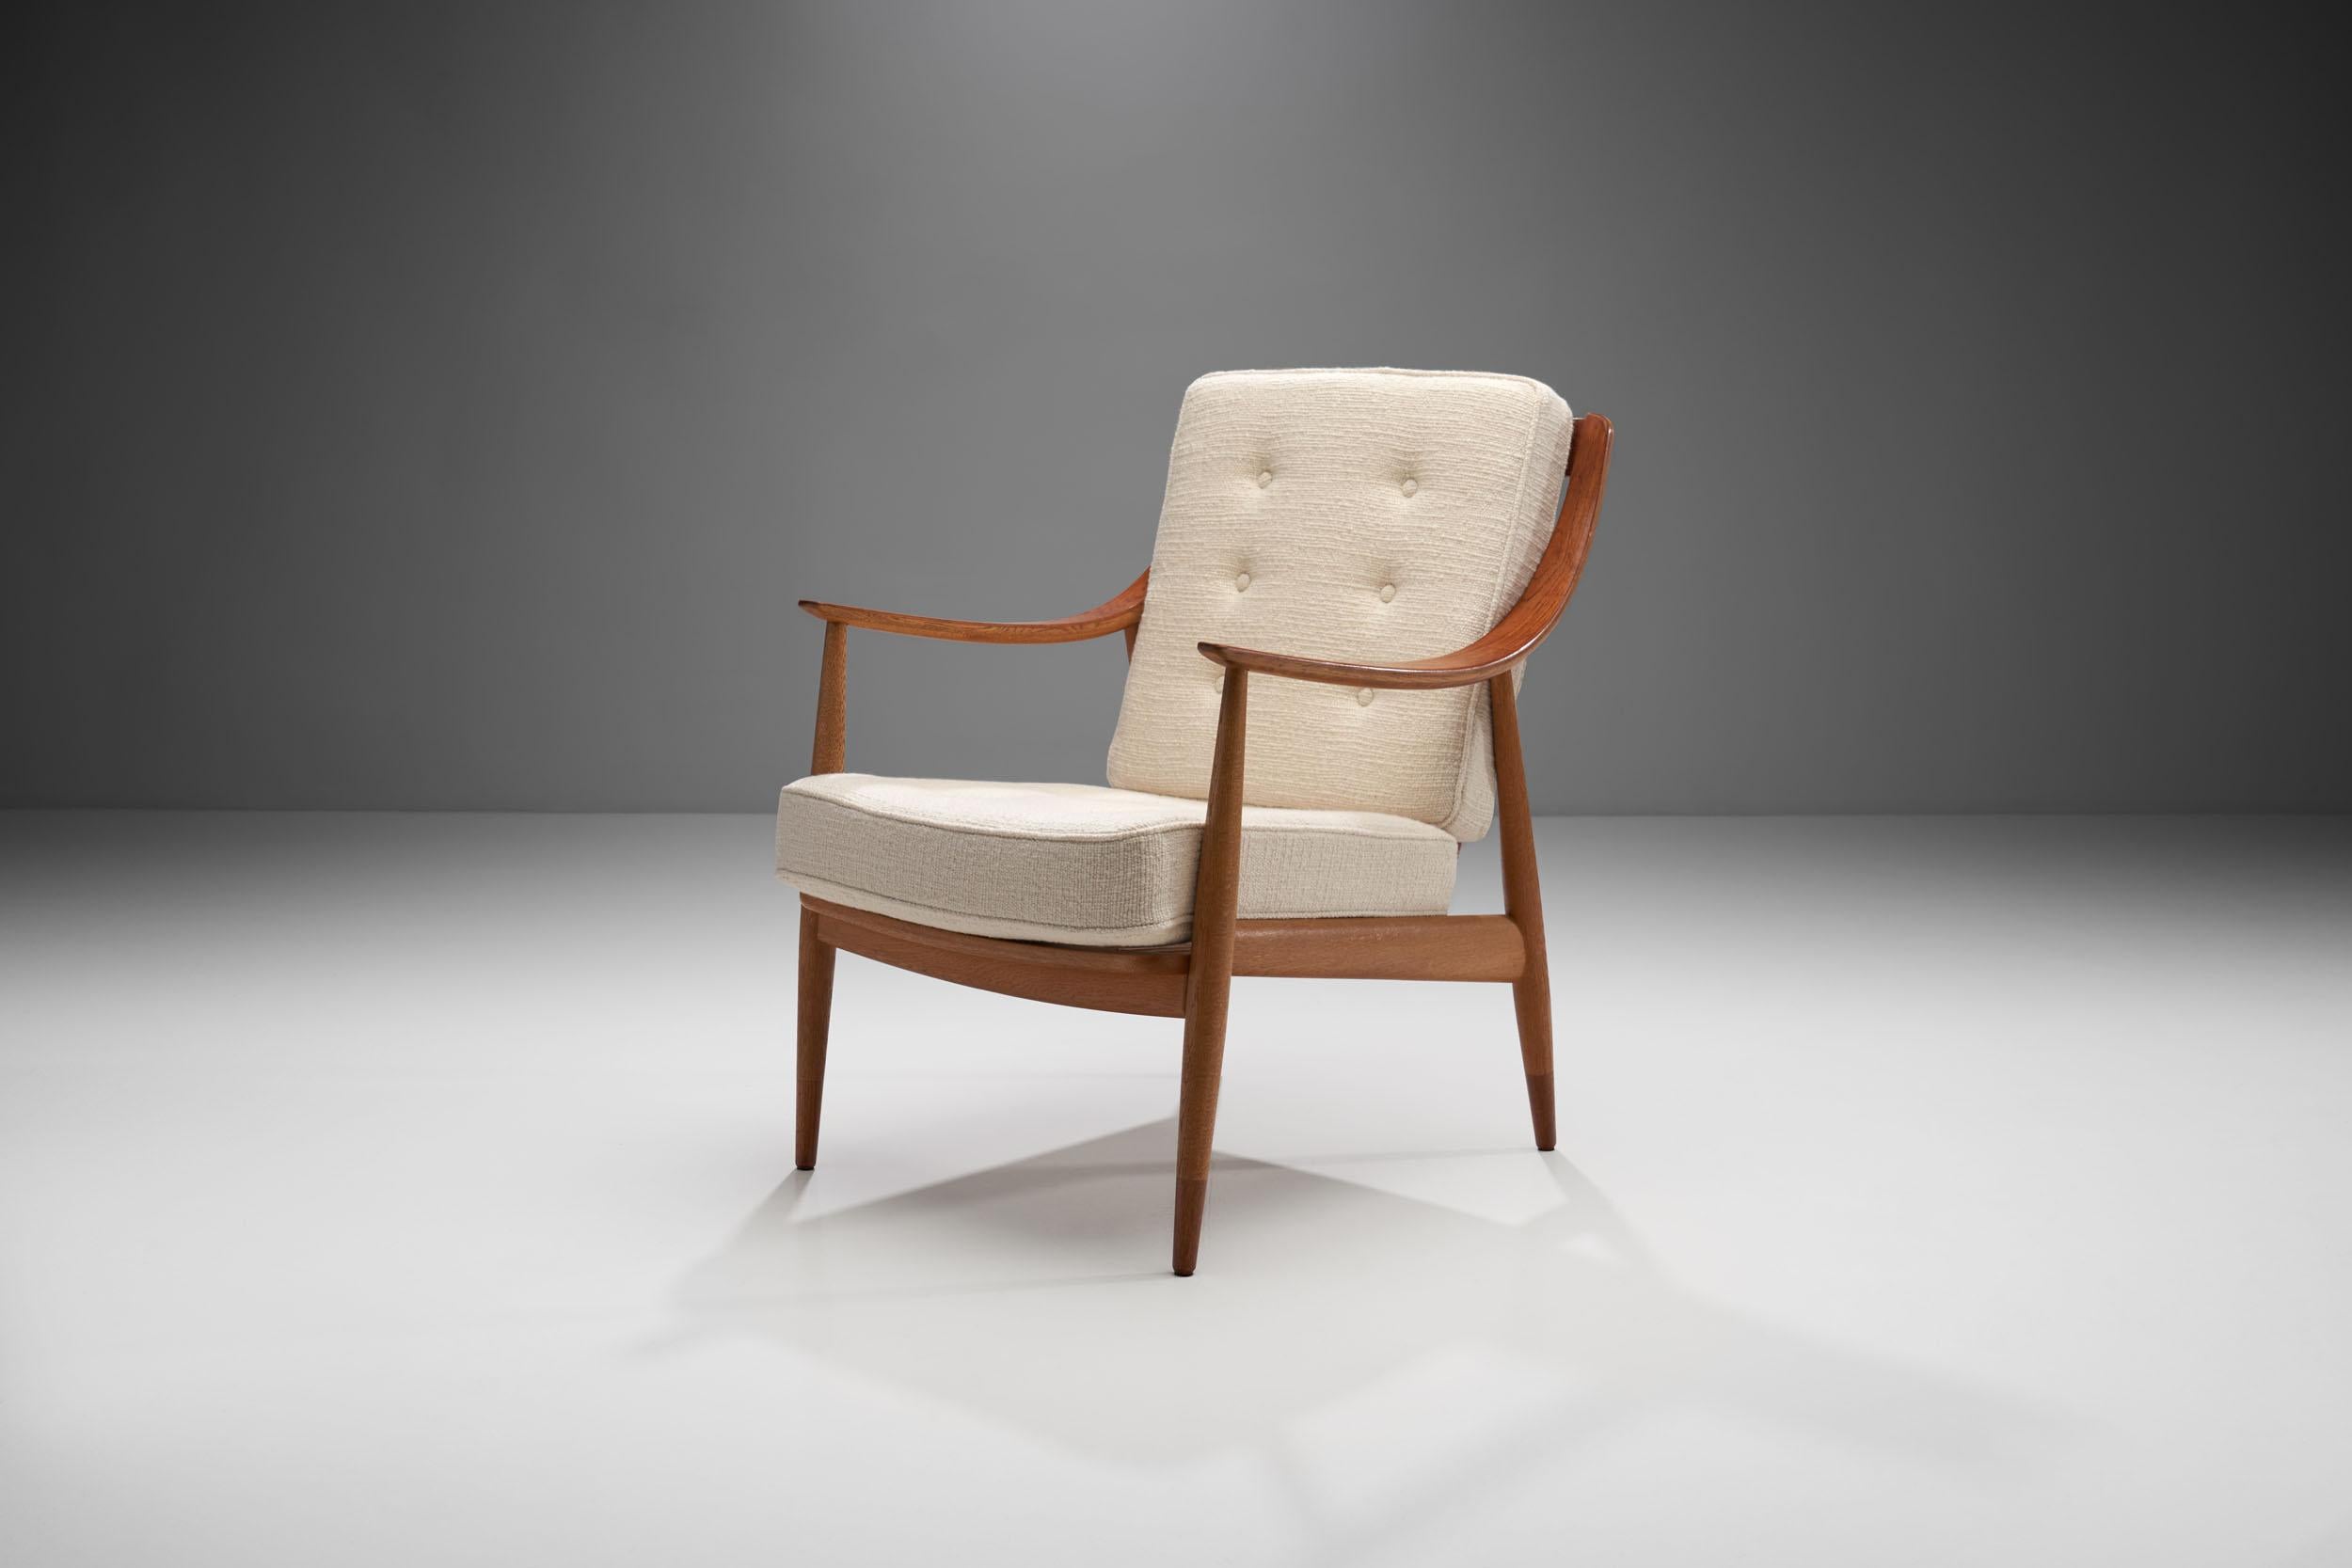 This is a beautiful Peter Hvidt & Orla Mølgaard-Nielsen designed model “FD 144” easy chair, made in Denmark in 1953. It was produced by France & Daverkosen Denmark.

This solid oak FD-144 Easy Chair by the designer duo, has distinctive, wide and